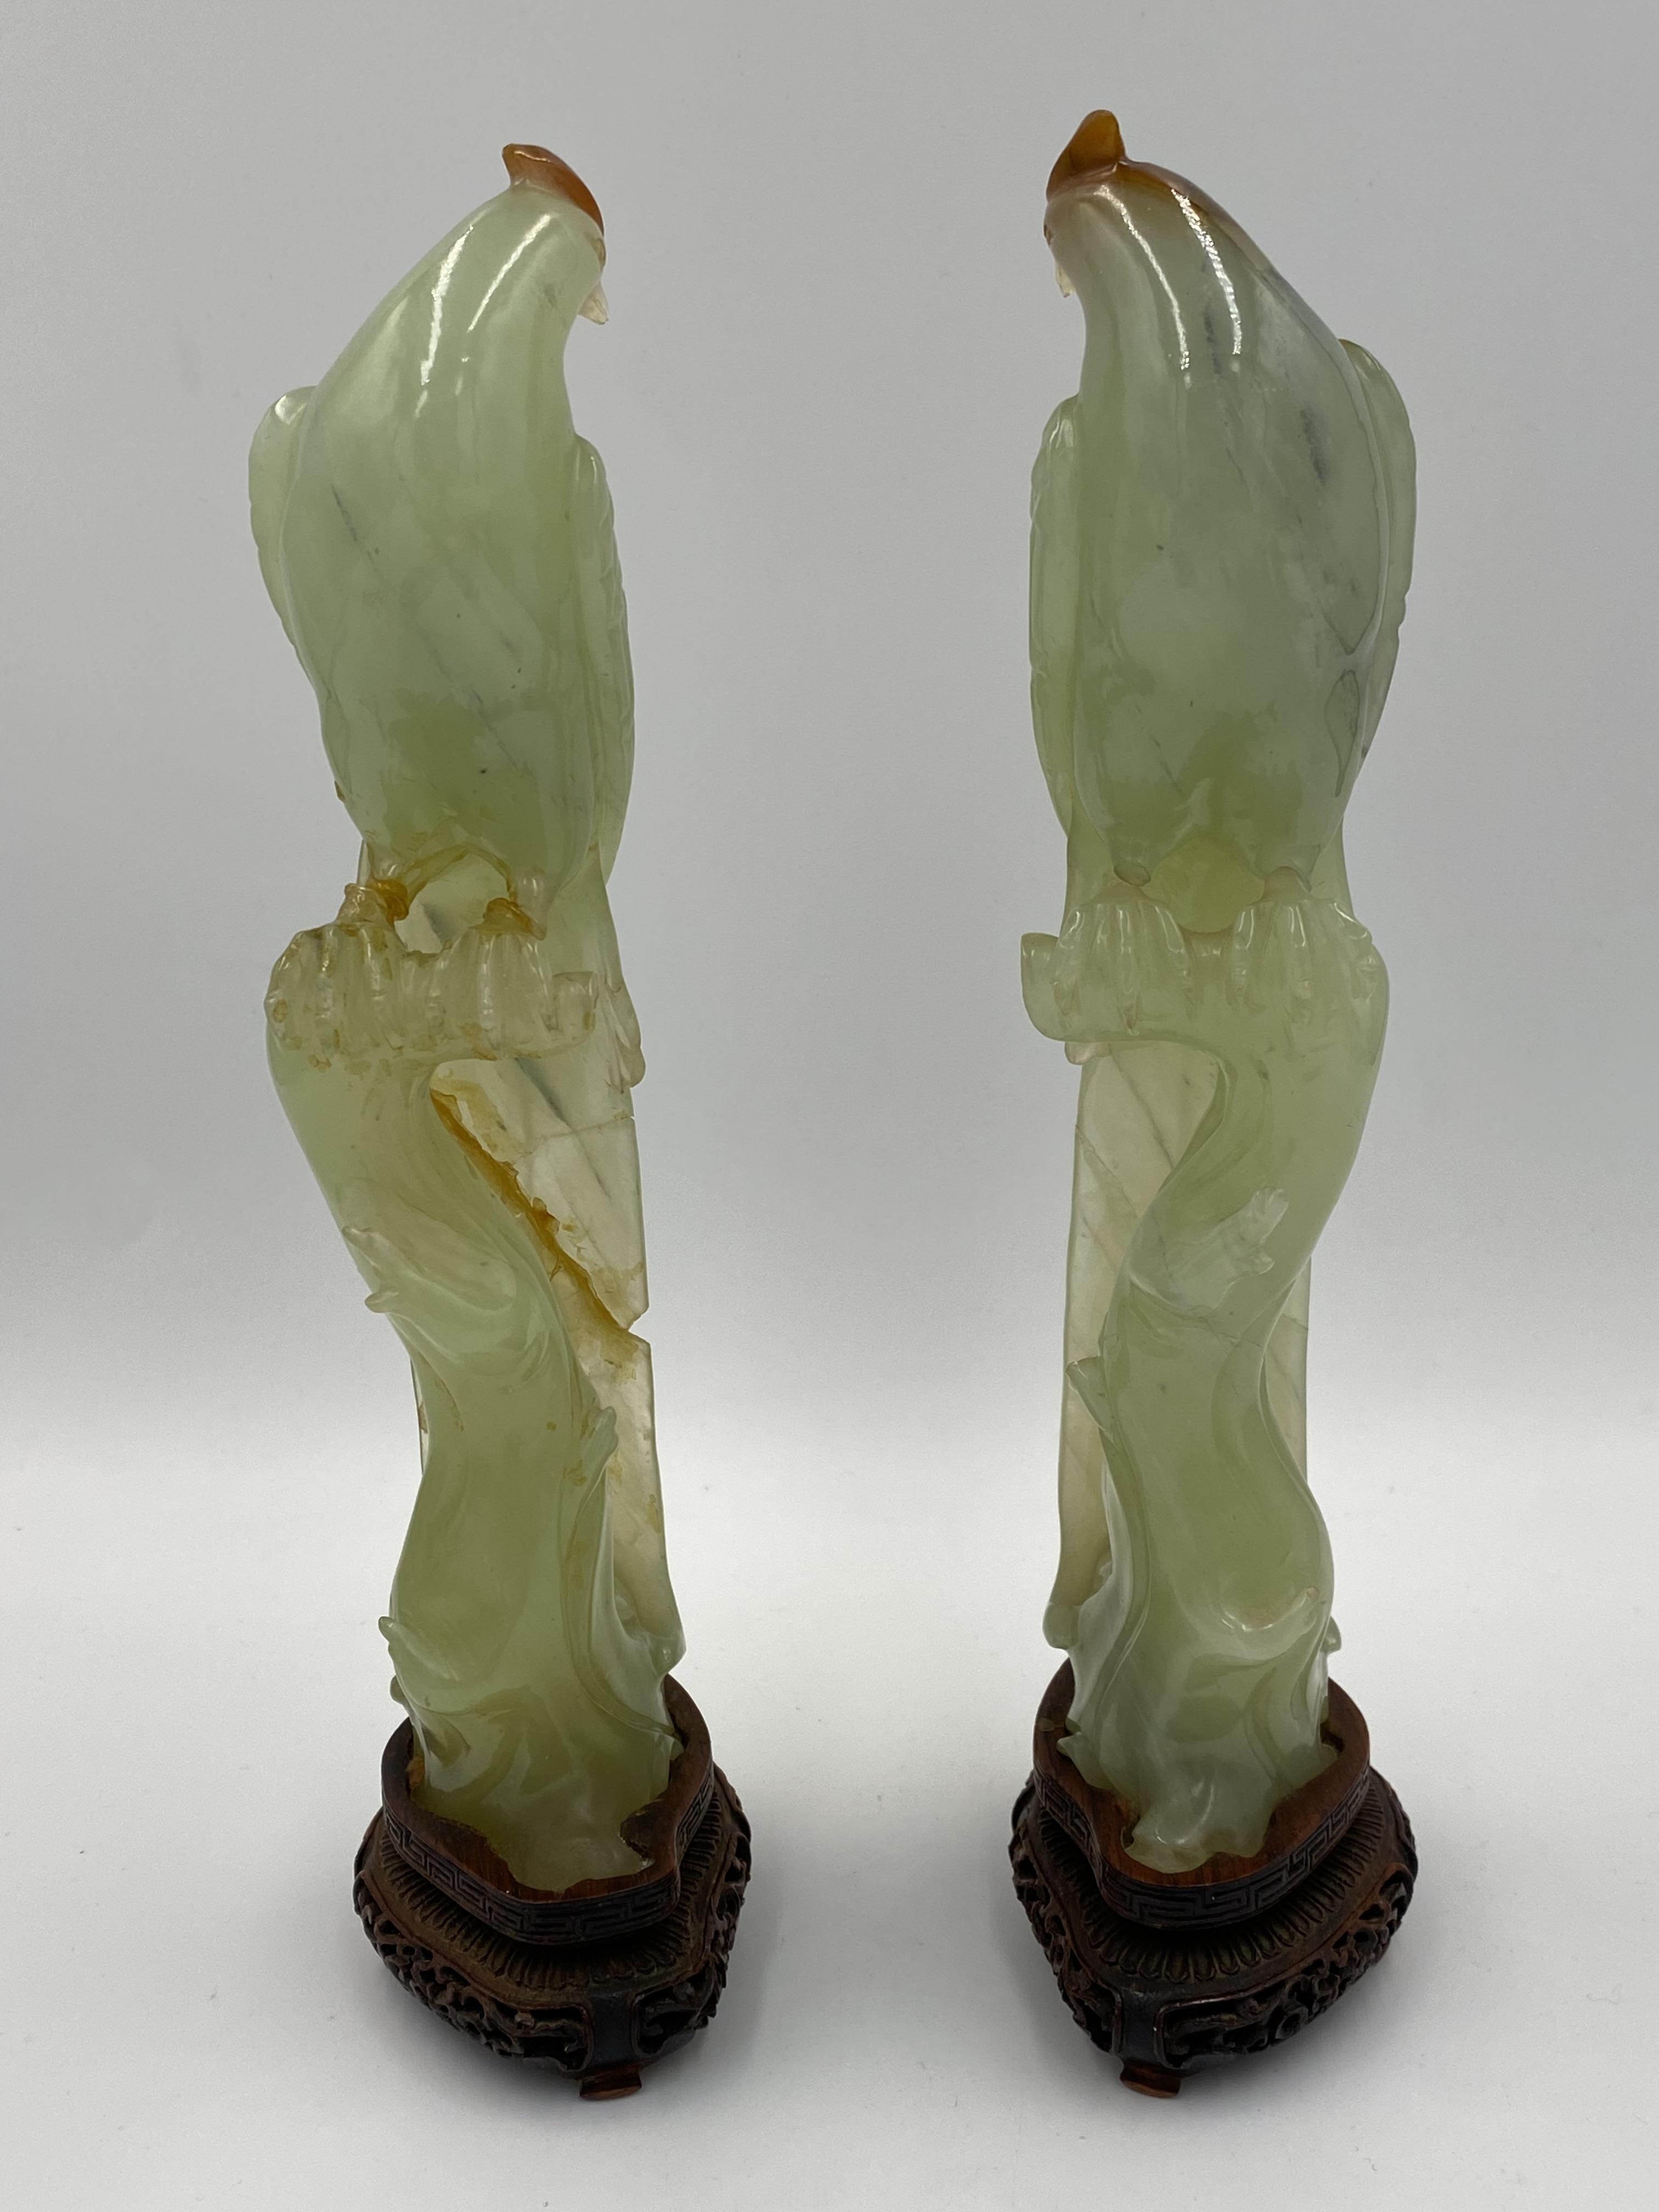 Pair of early 20th century chinese carved jade birds resting on tree stumps - Image 3 of 12